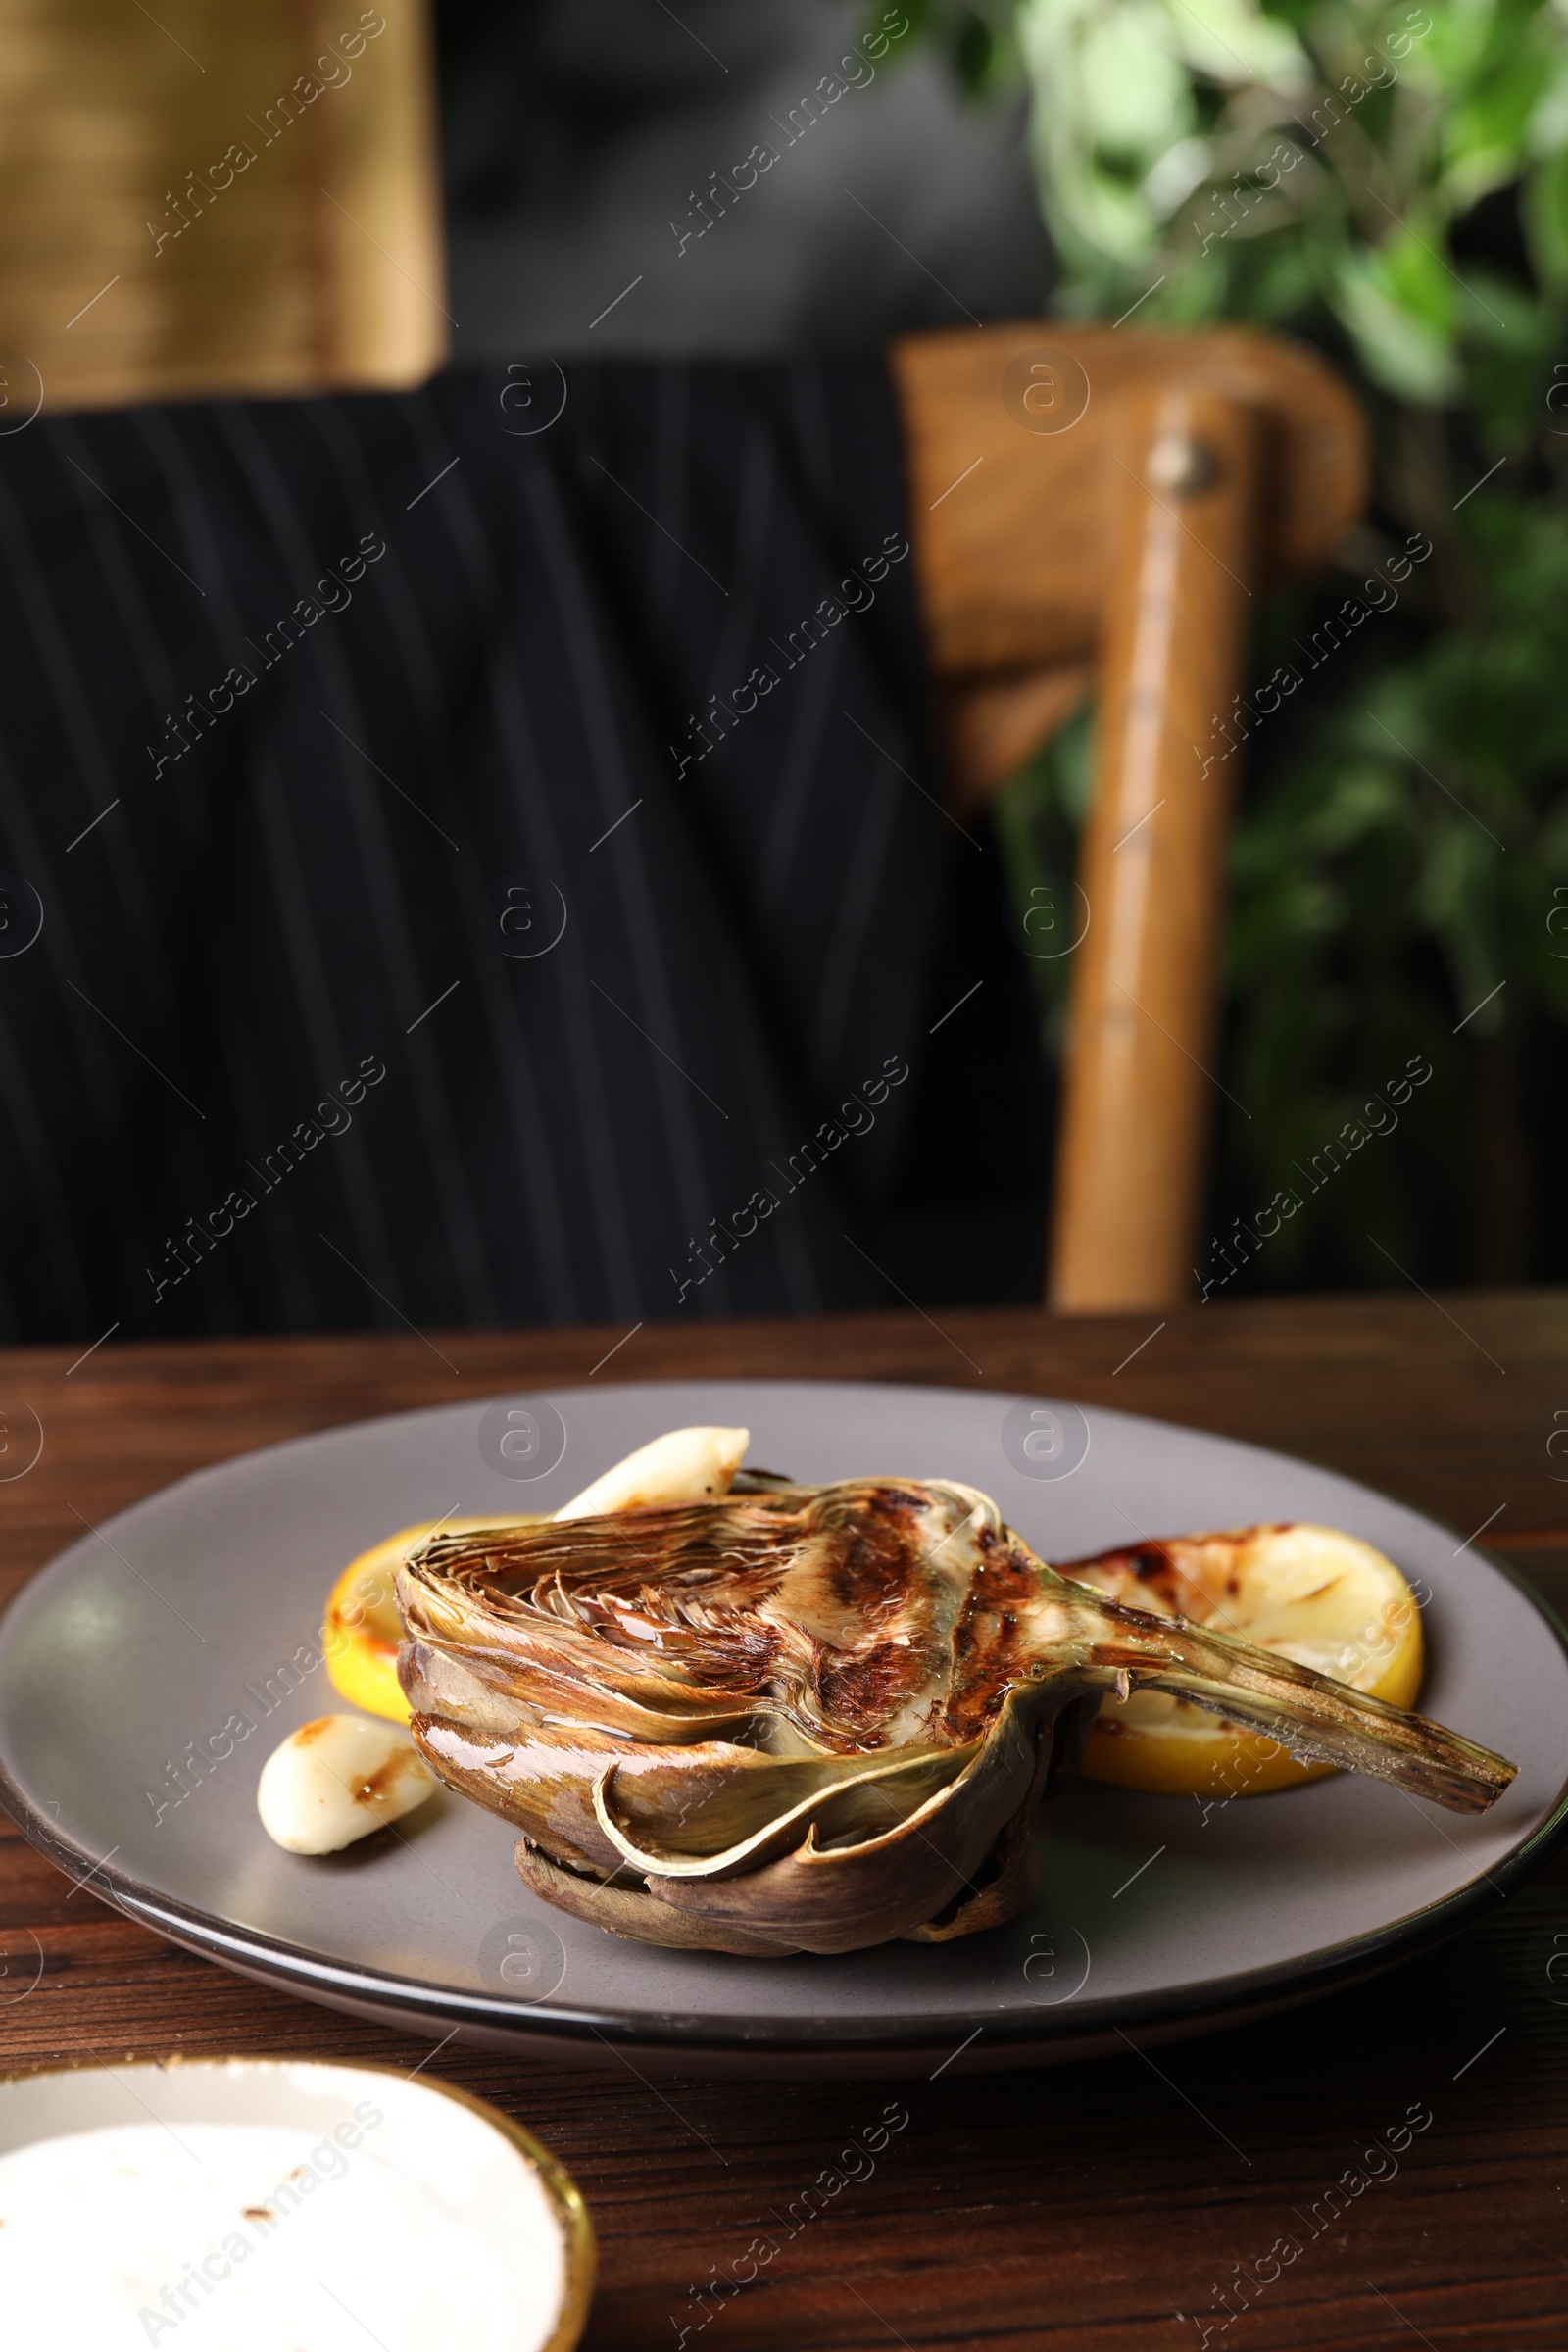 Photo of Tasty grilled artichoke served on wooden table